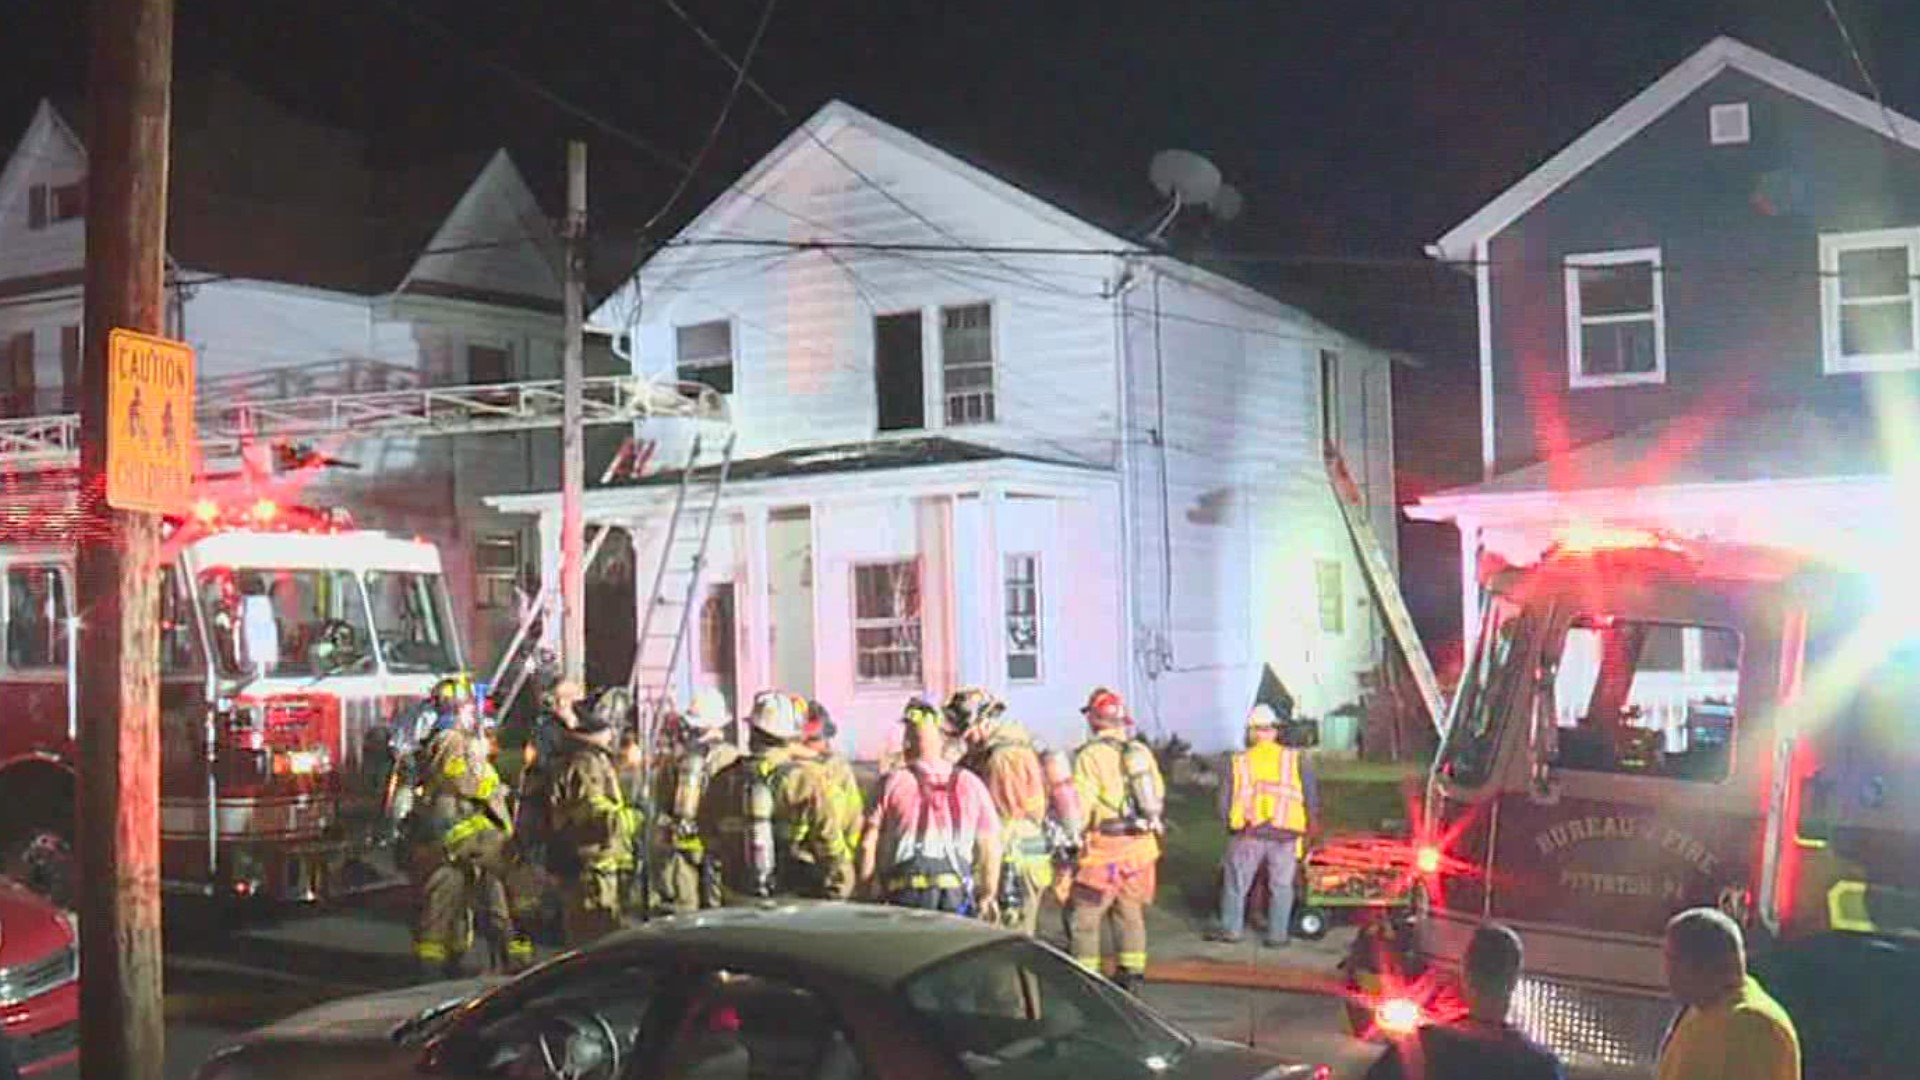 One person was sent to the hospital after a fire Thursday night in Luzerne County.